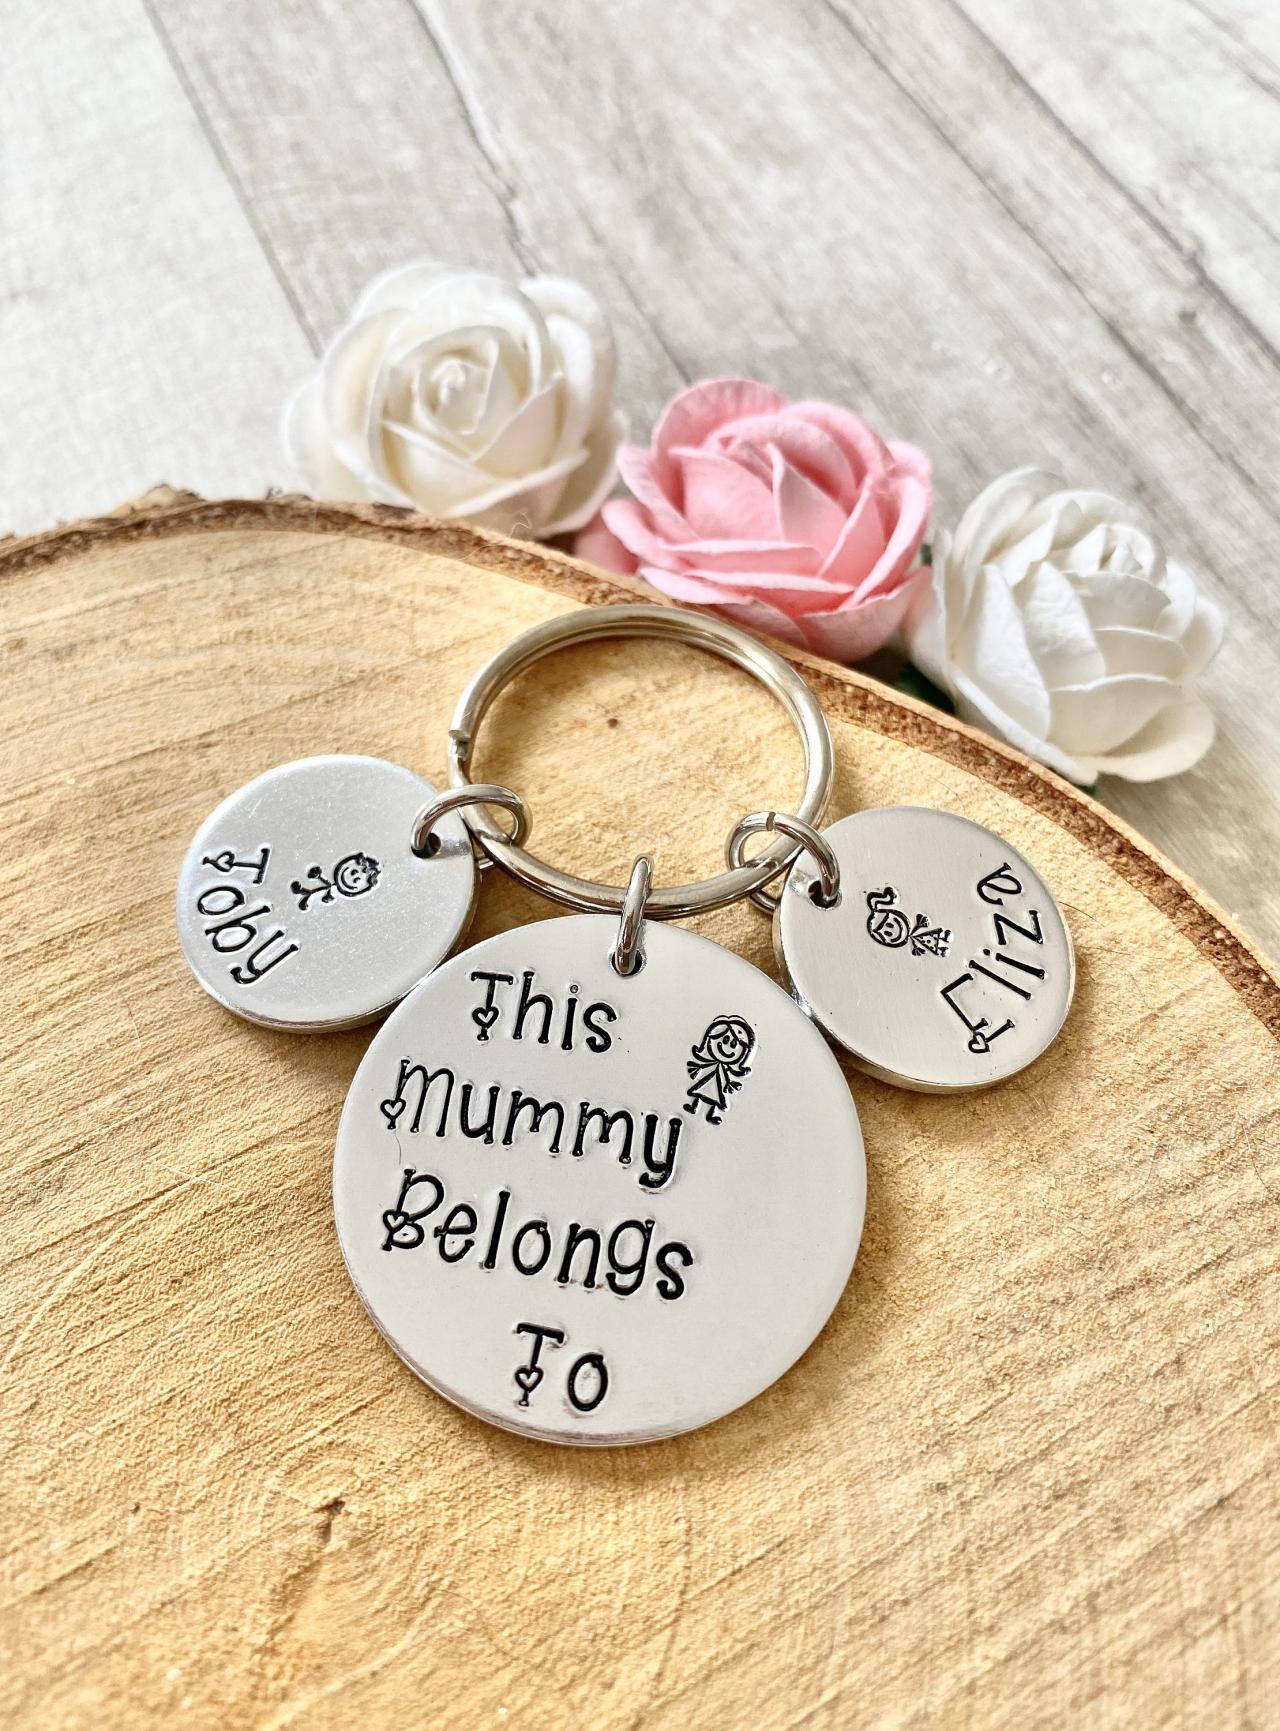 Gift For Mum, Gift For Mom, Mum Gift, Mom Gift, Mothers Day Gift, From Kids, Personalized Mom Gift, Personalised Mum Gift, Mummy Gift